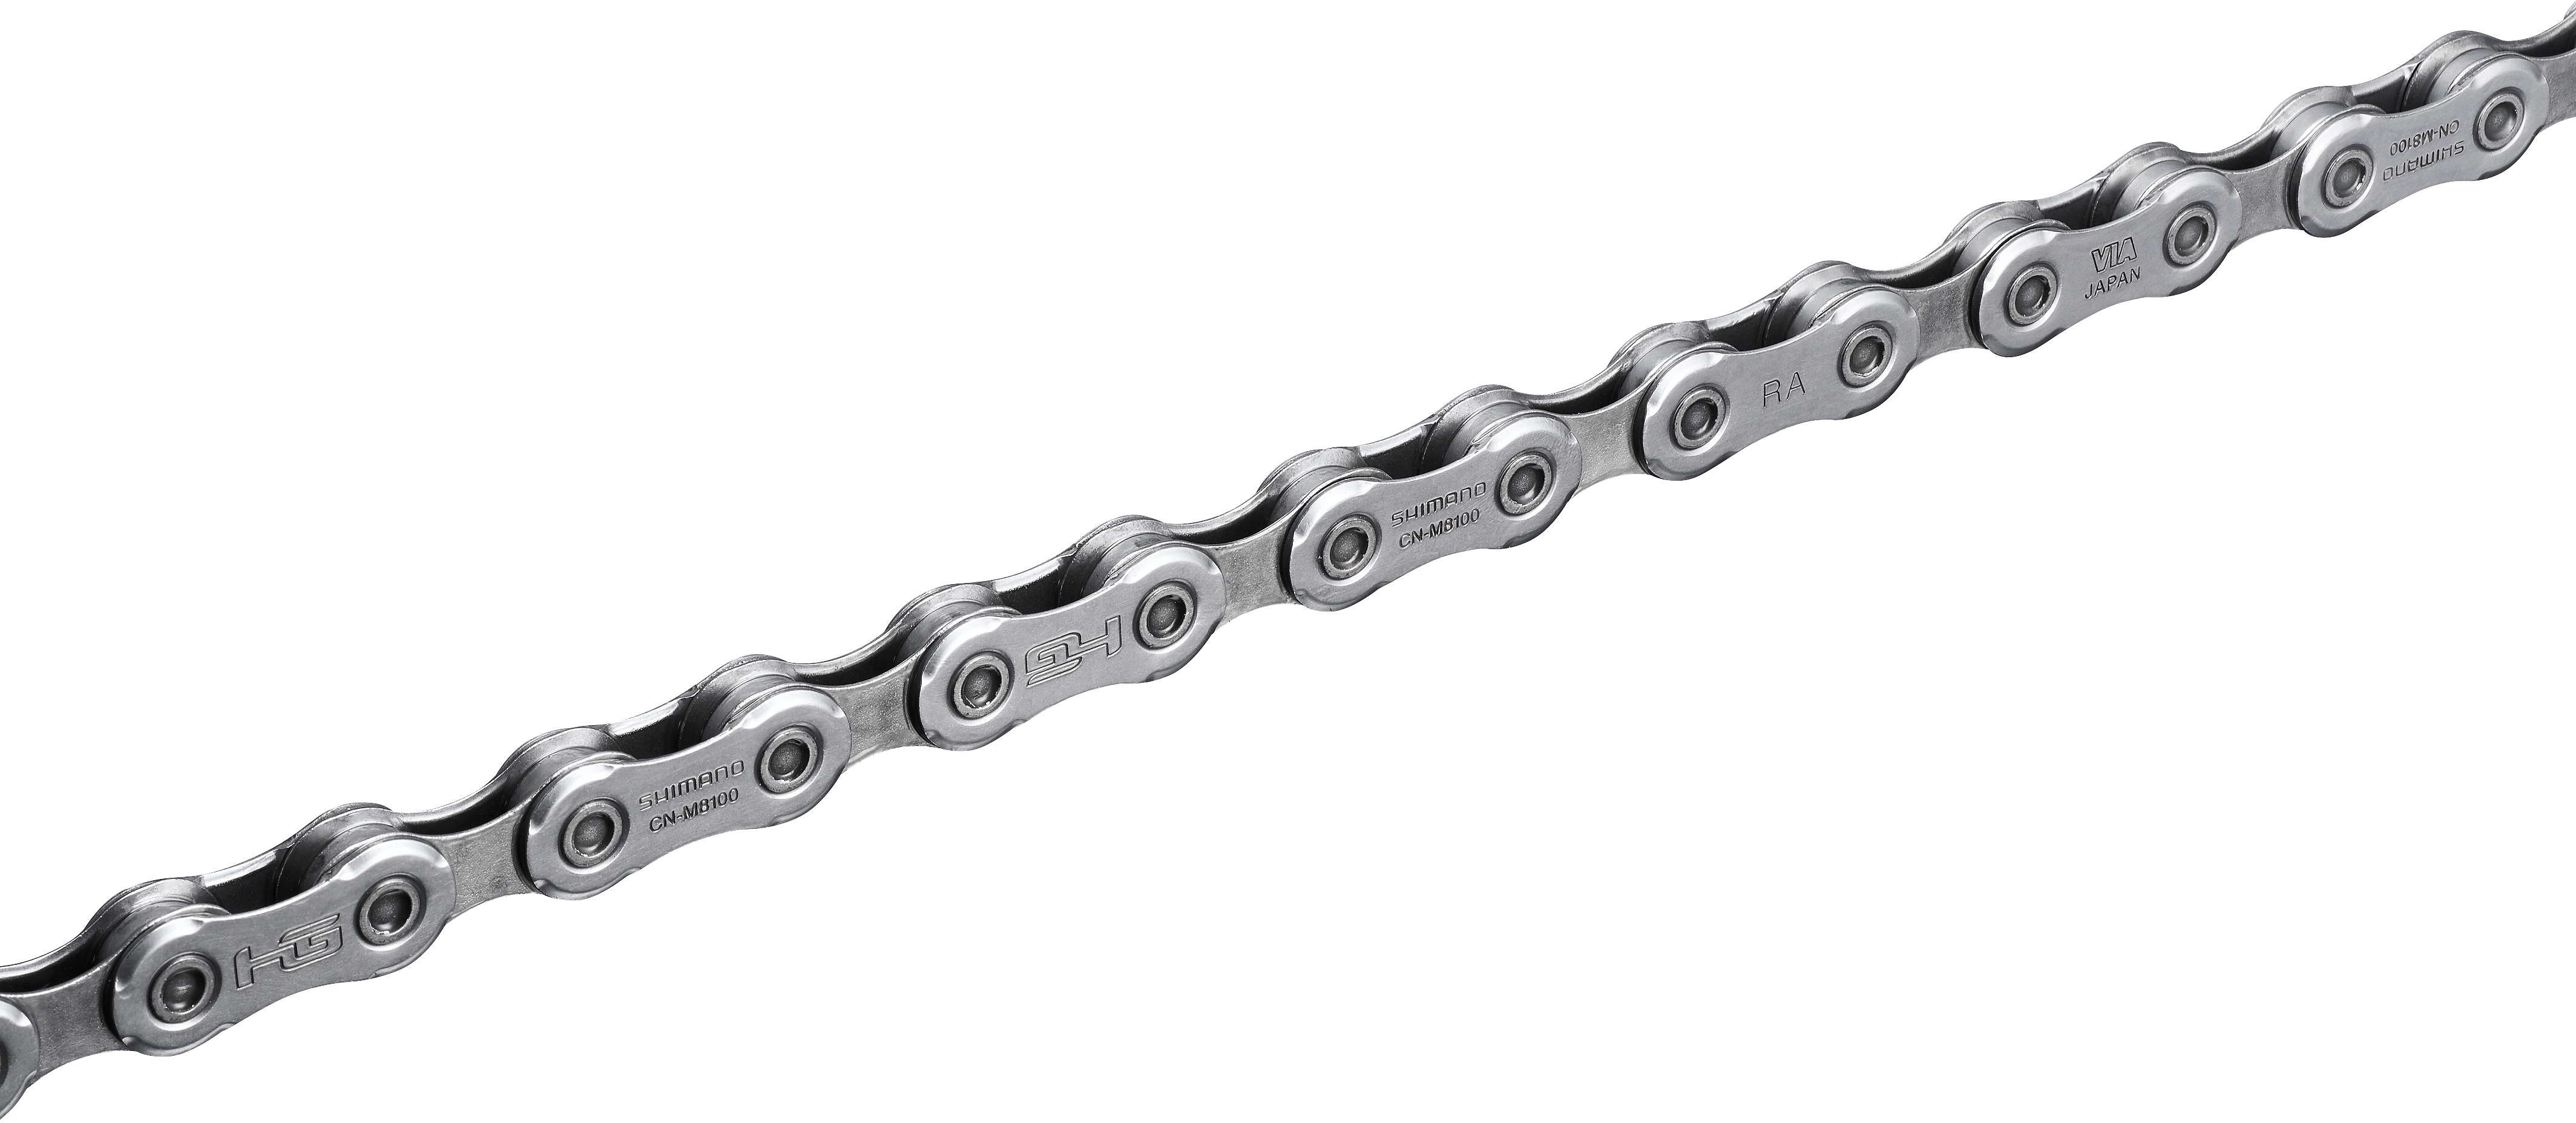 cn-m8100-xtultegra-chain-with-quick-link-12-speed-126l